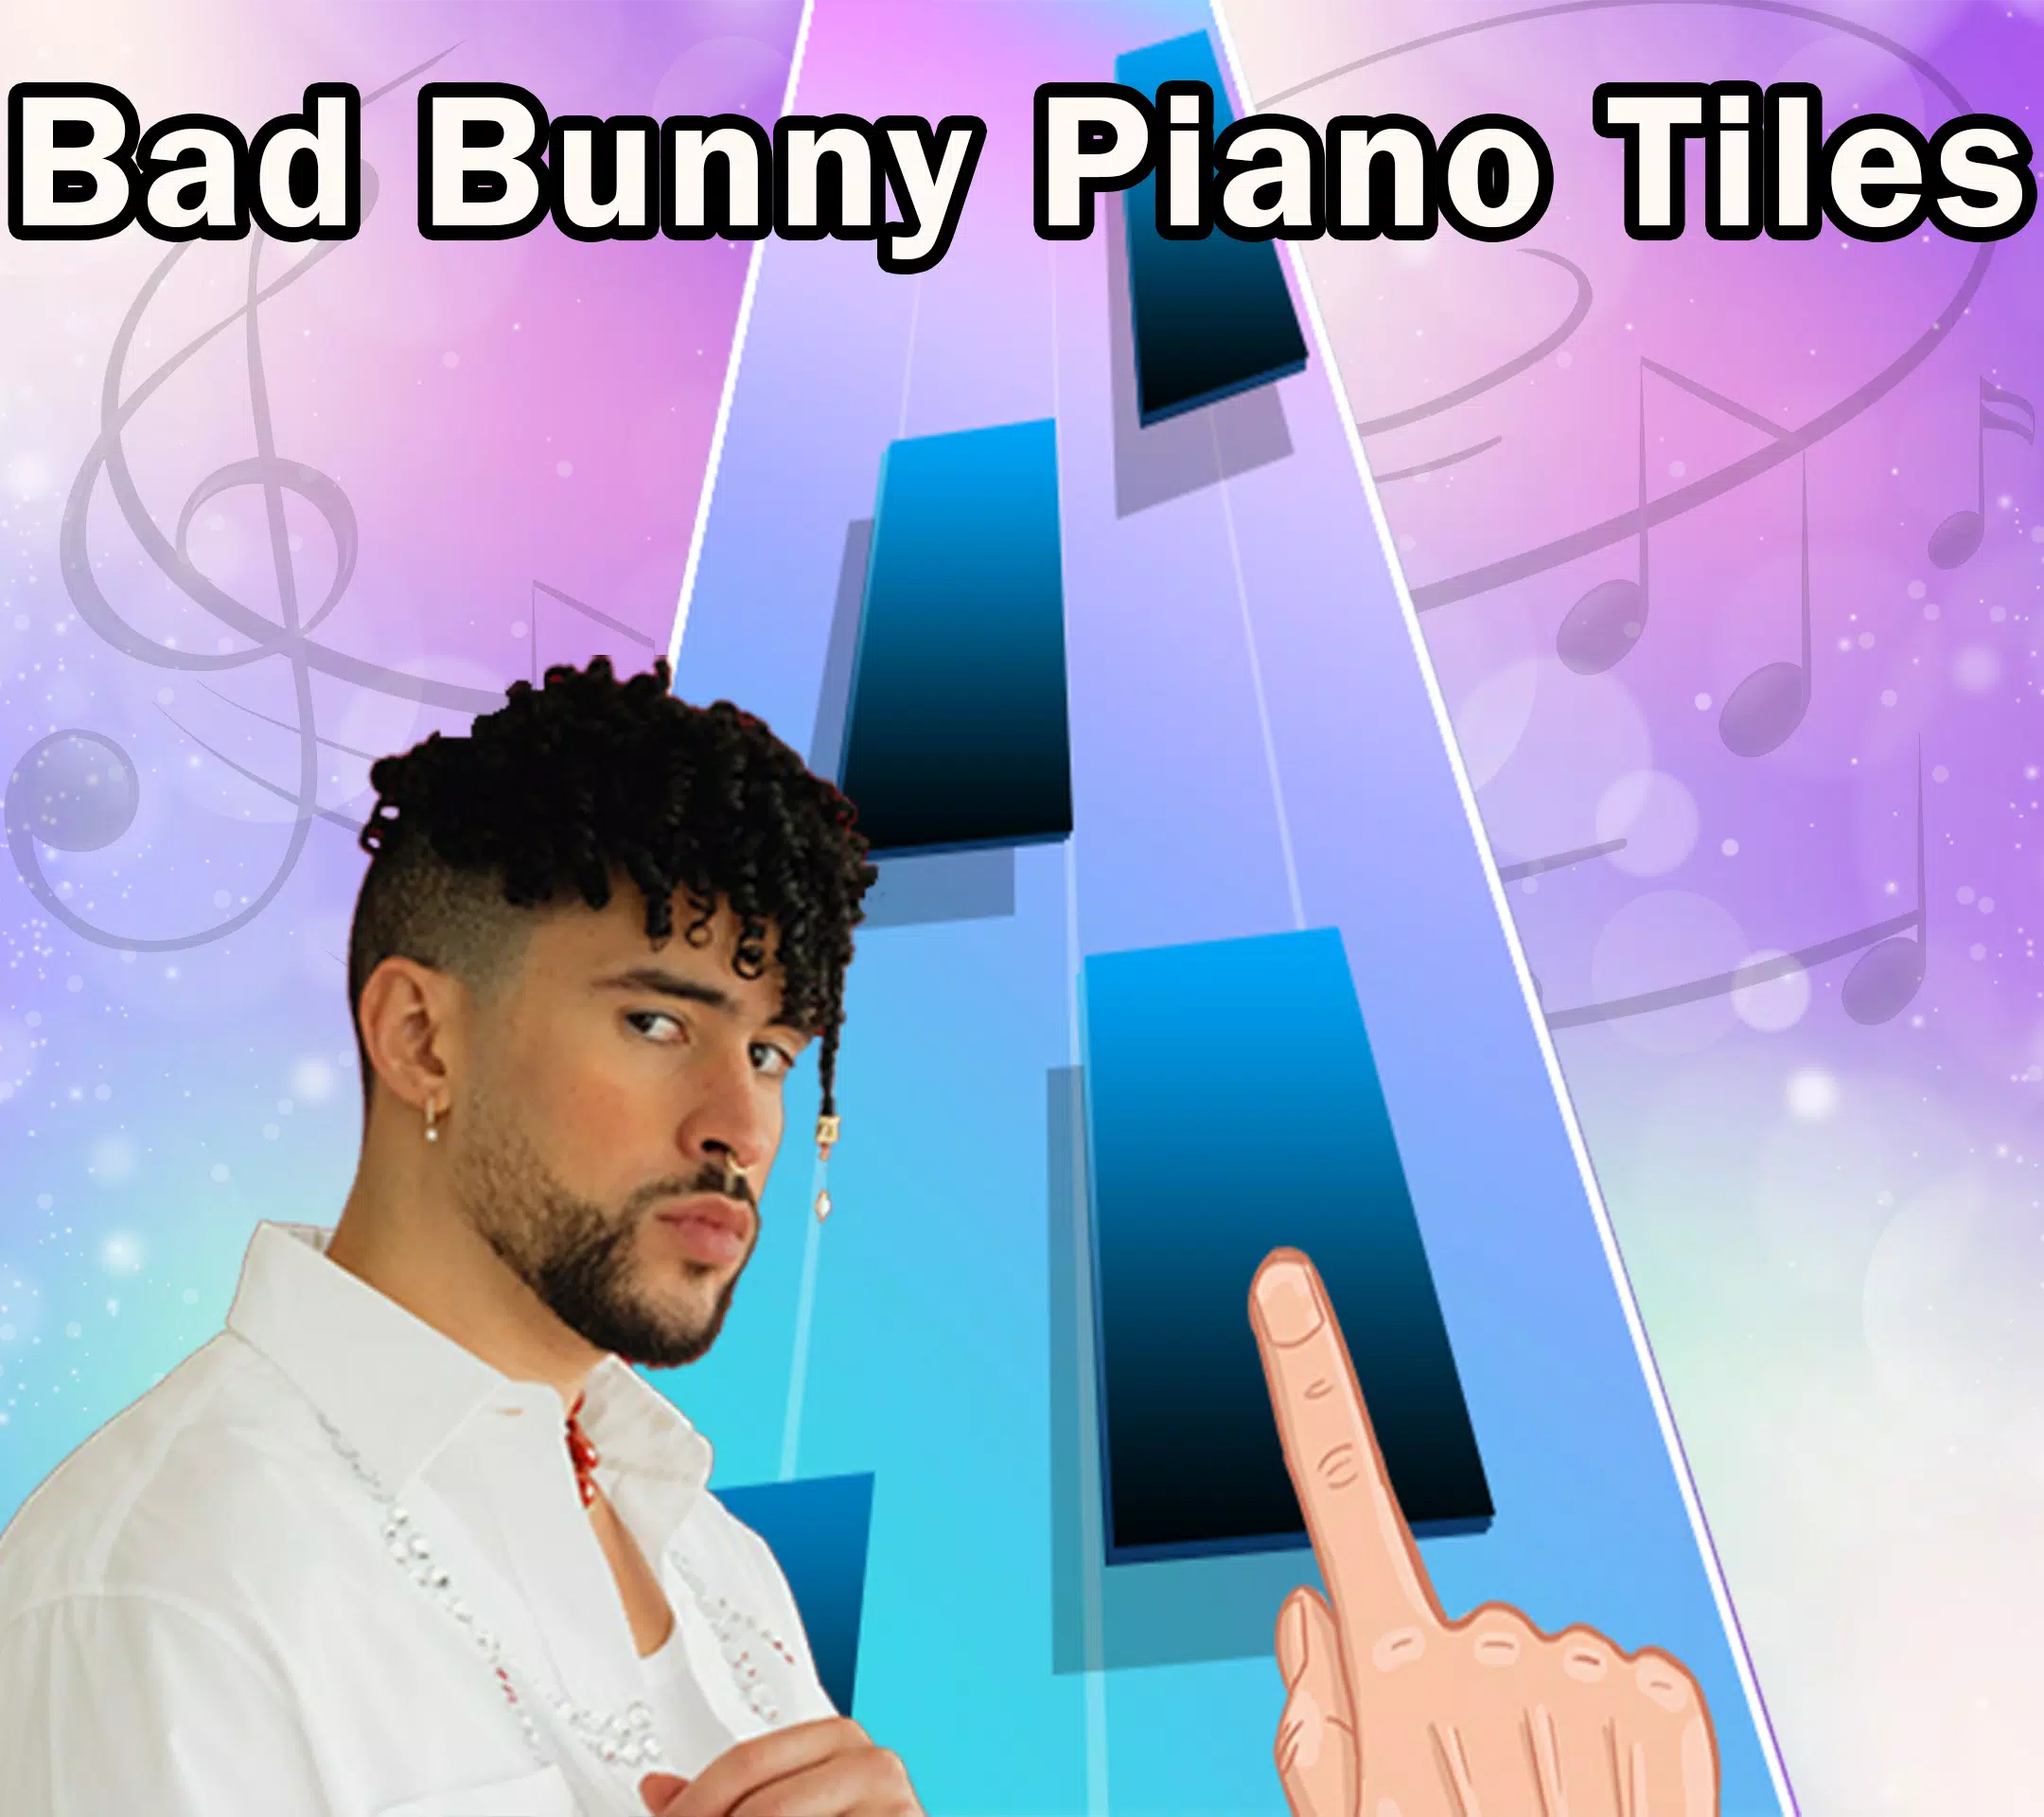 Luccas Neto Piano Tiles Apk Download for Android- Latest version 0.1-  luccas.neto.jogo.piano.tiles